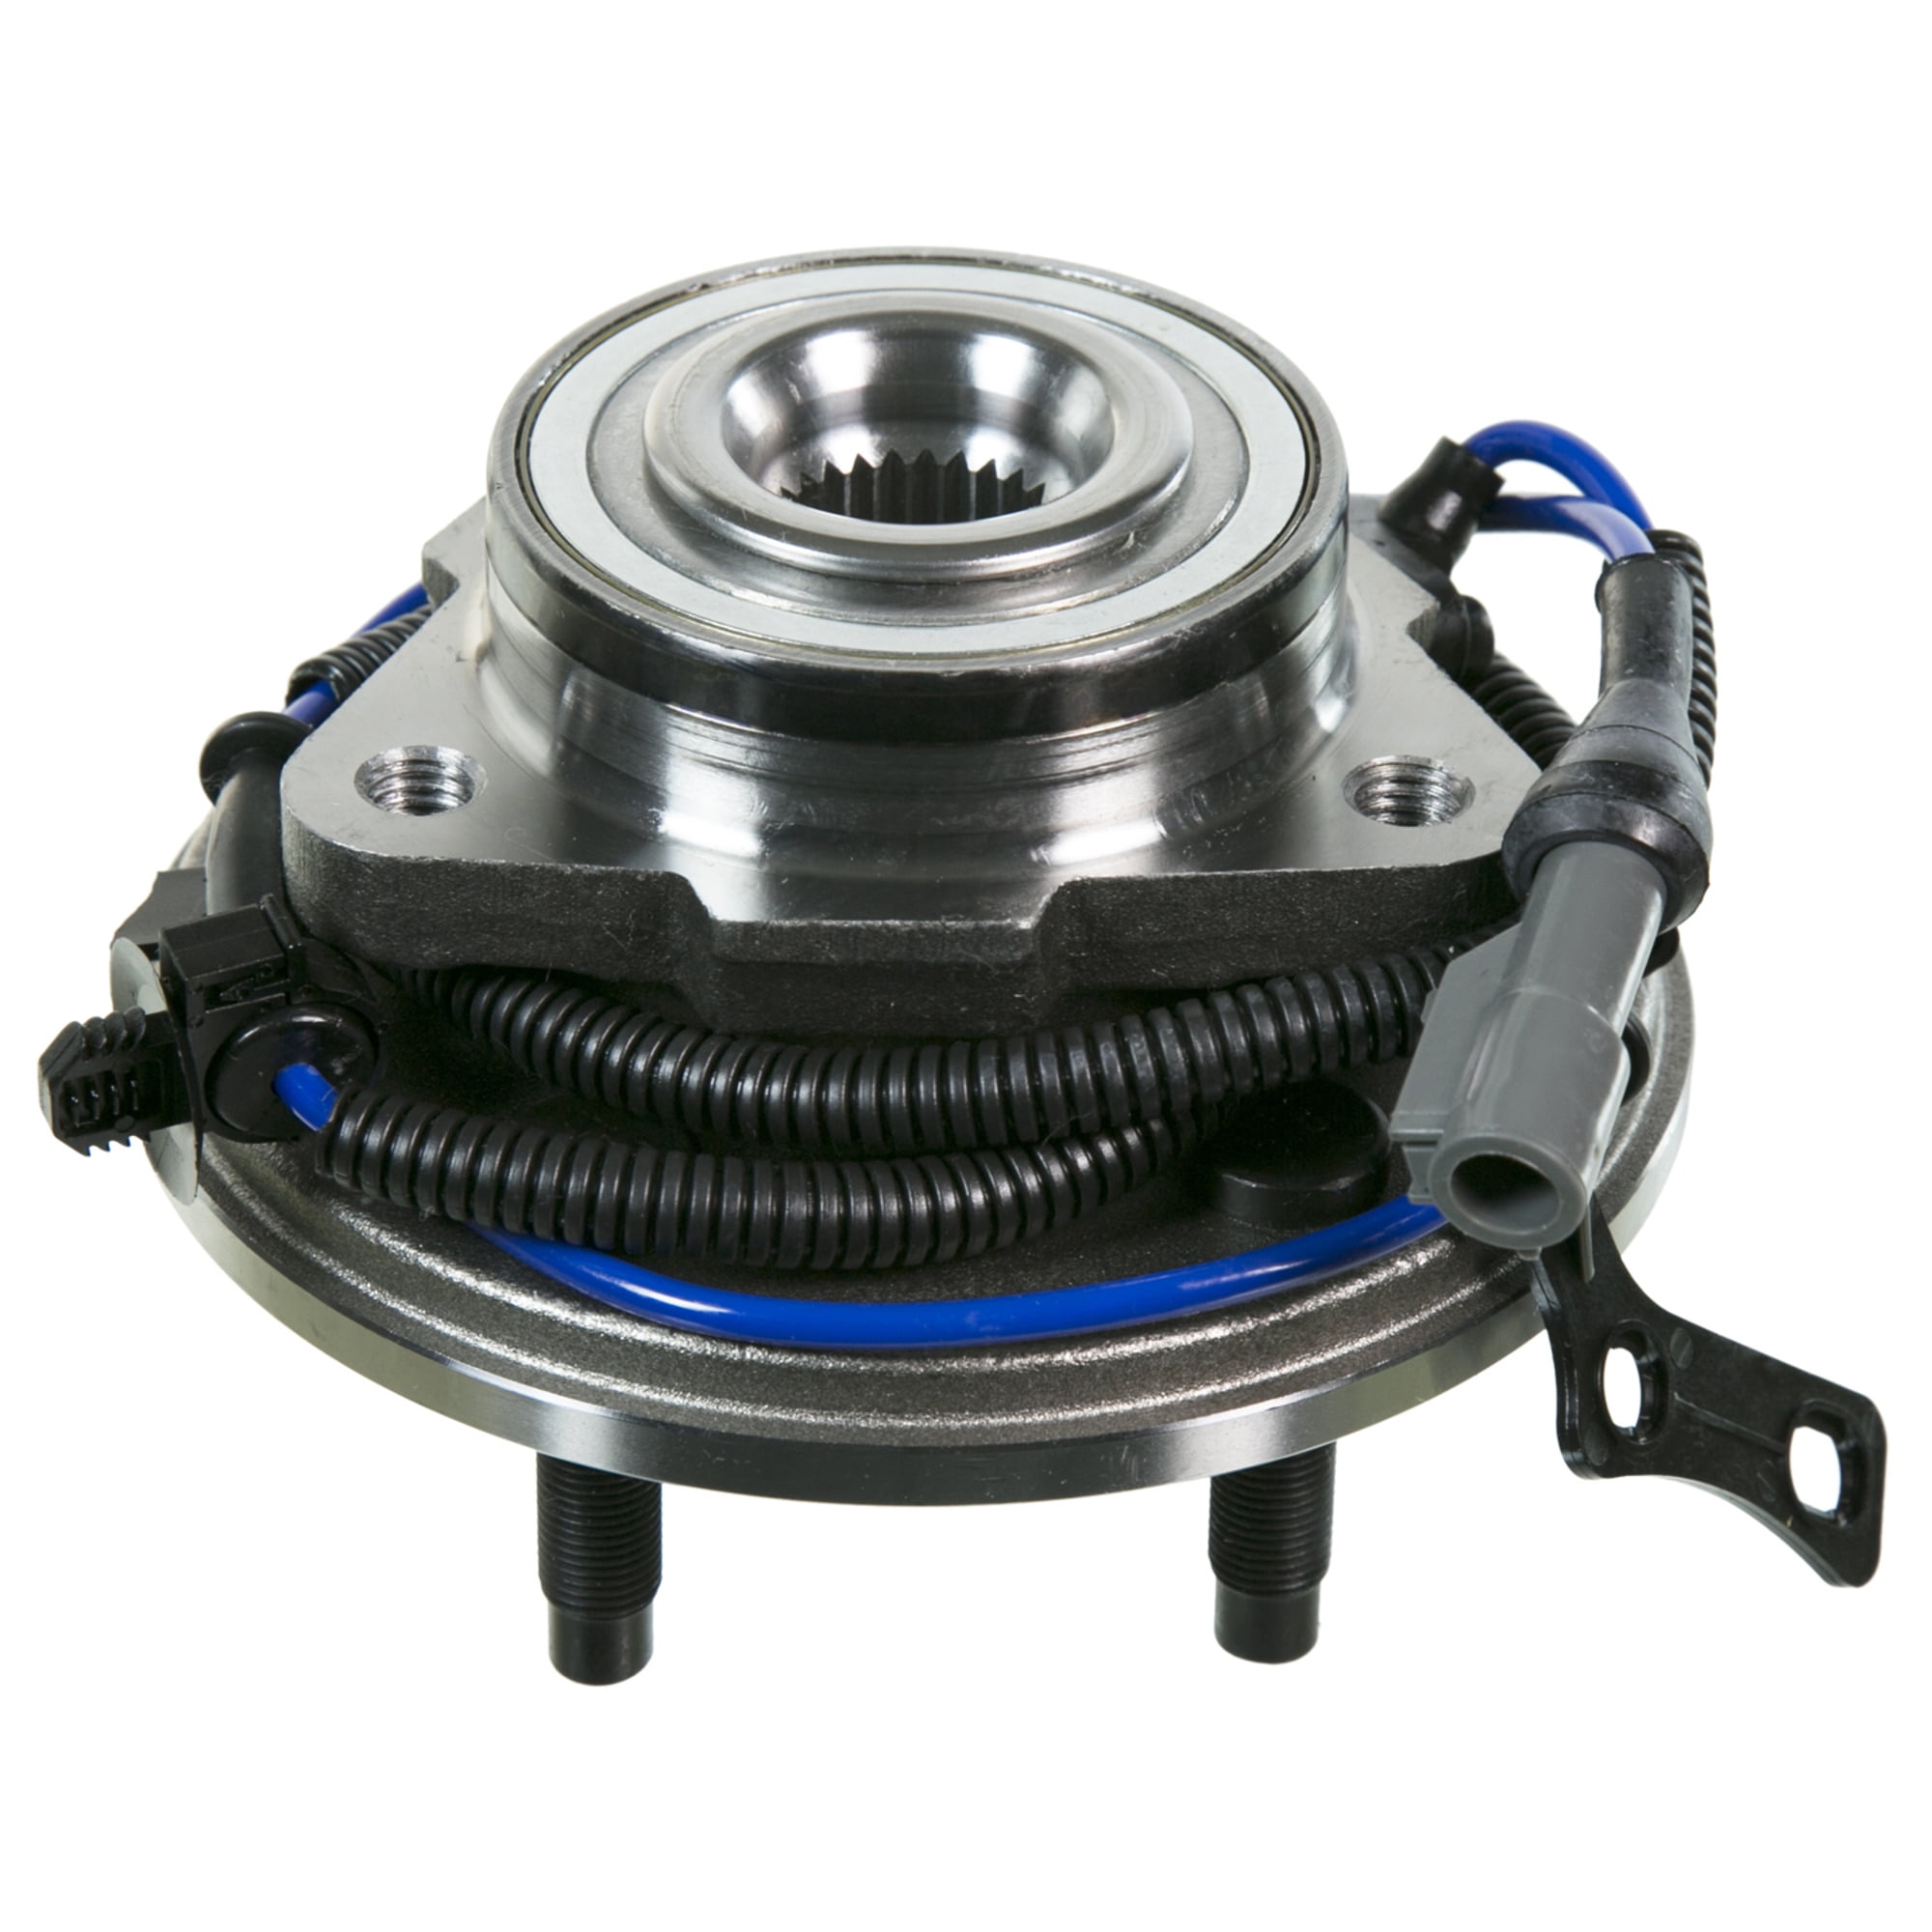 MOOG 515078 Wheel Bearing and Hub Assembly Fits select: 2006-2010 FORD  EXPLORER, 2007-2010 FORD EXPLORER SPORT TRAC